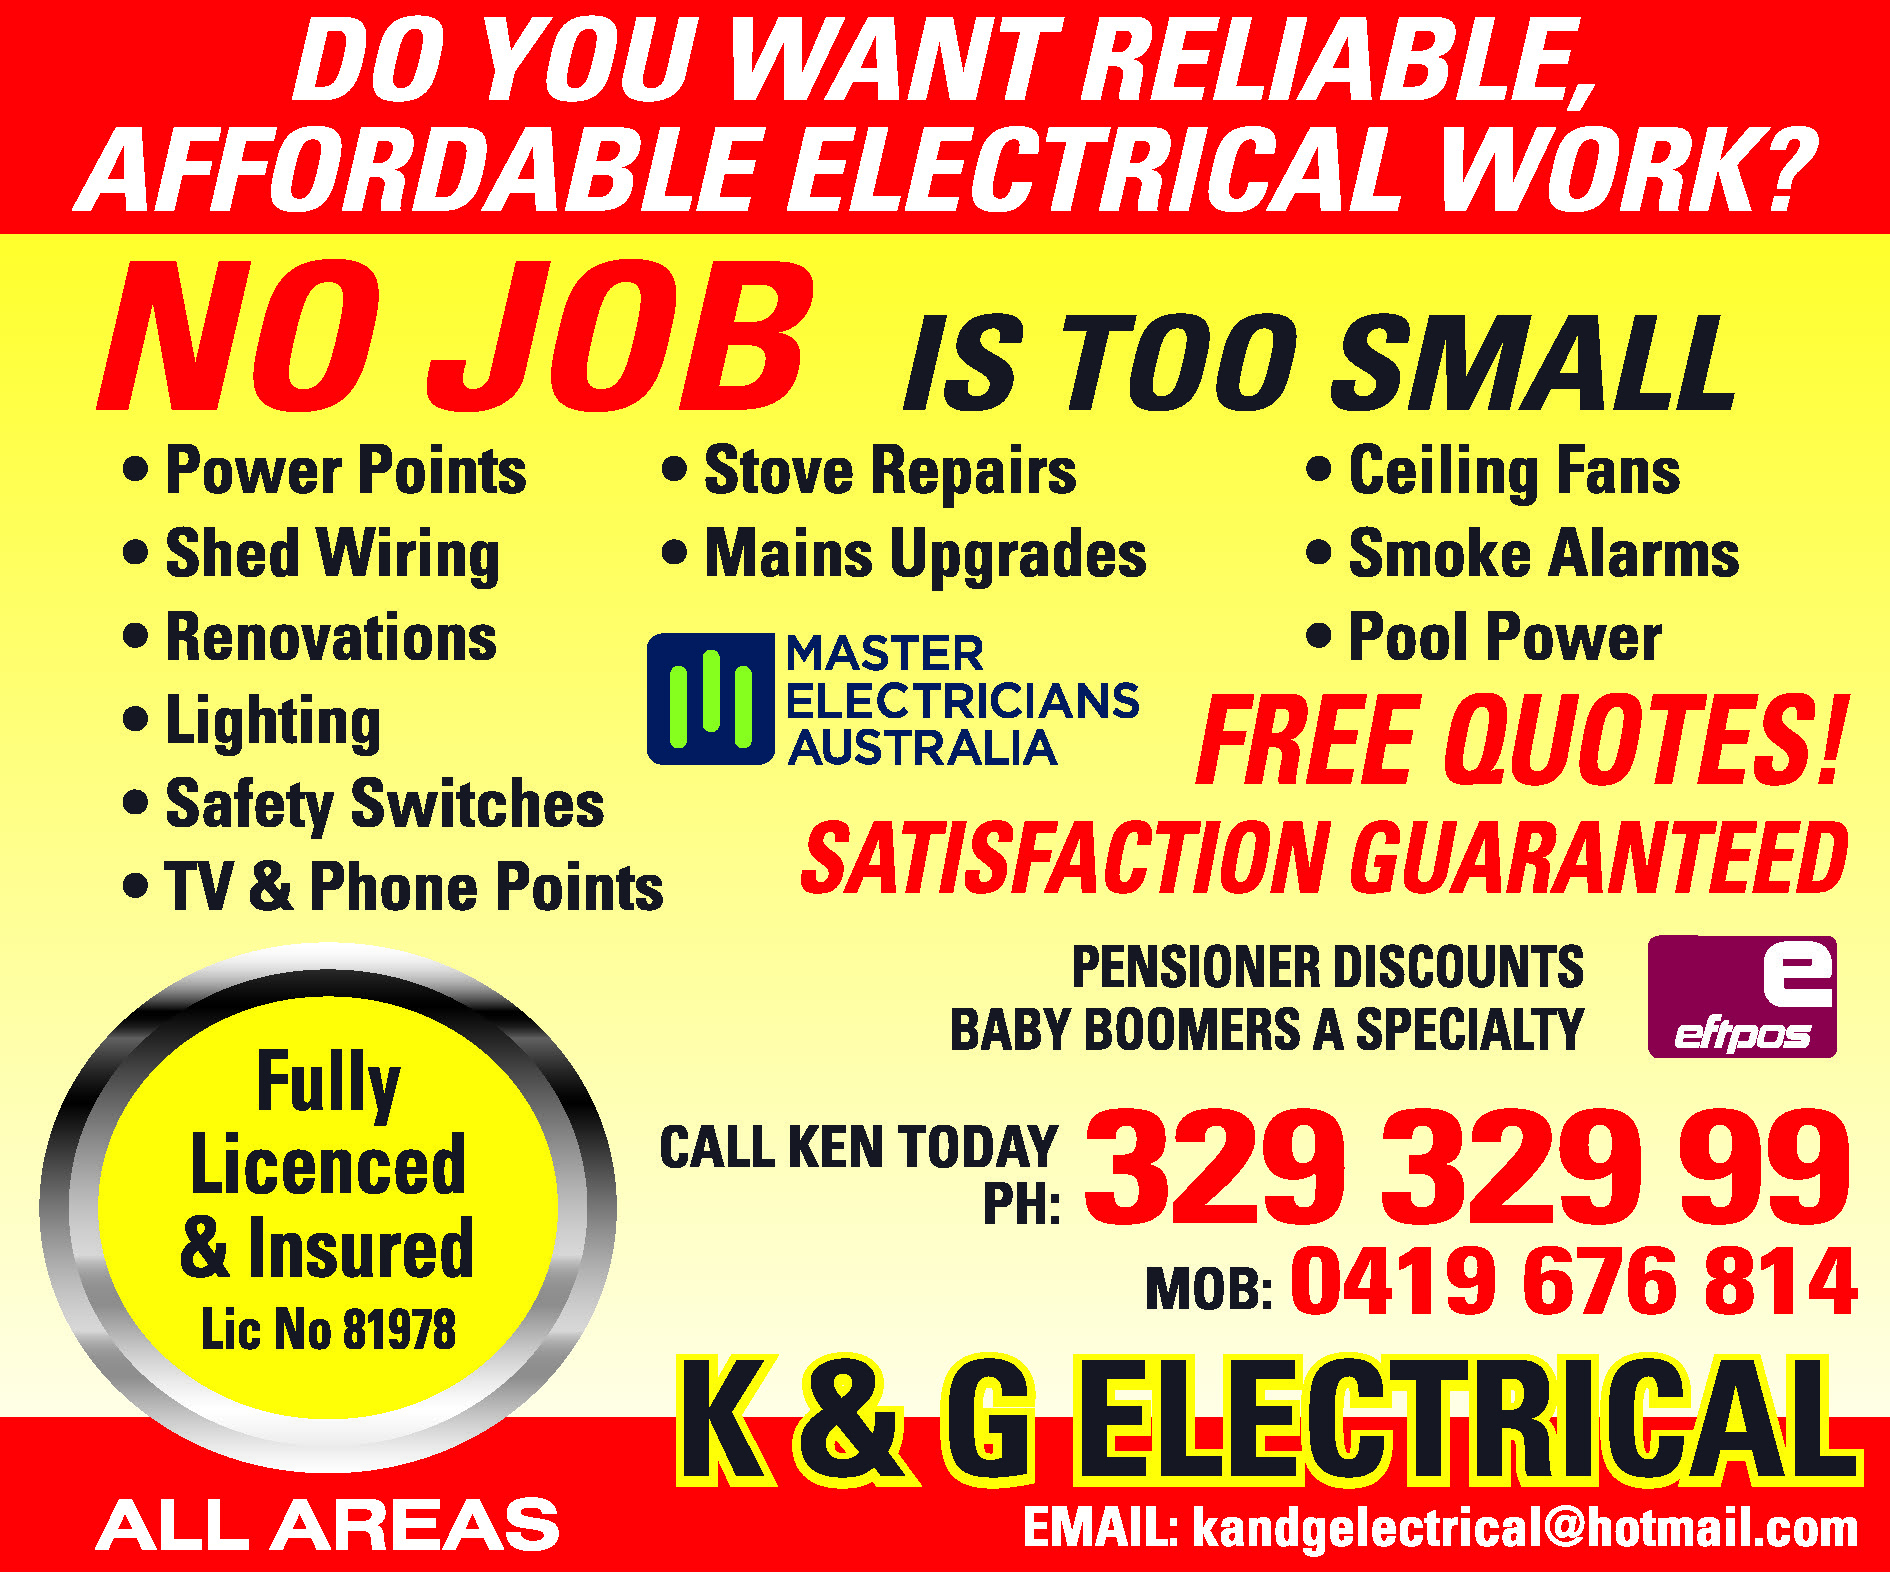 K & G Electrical - Electricians